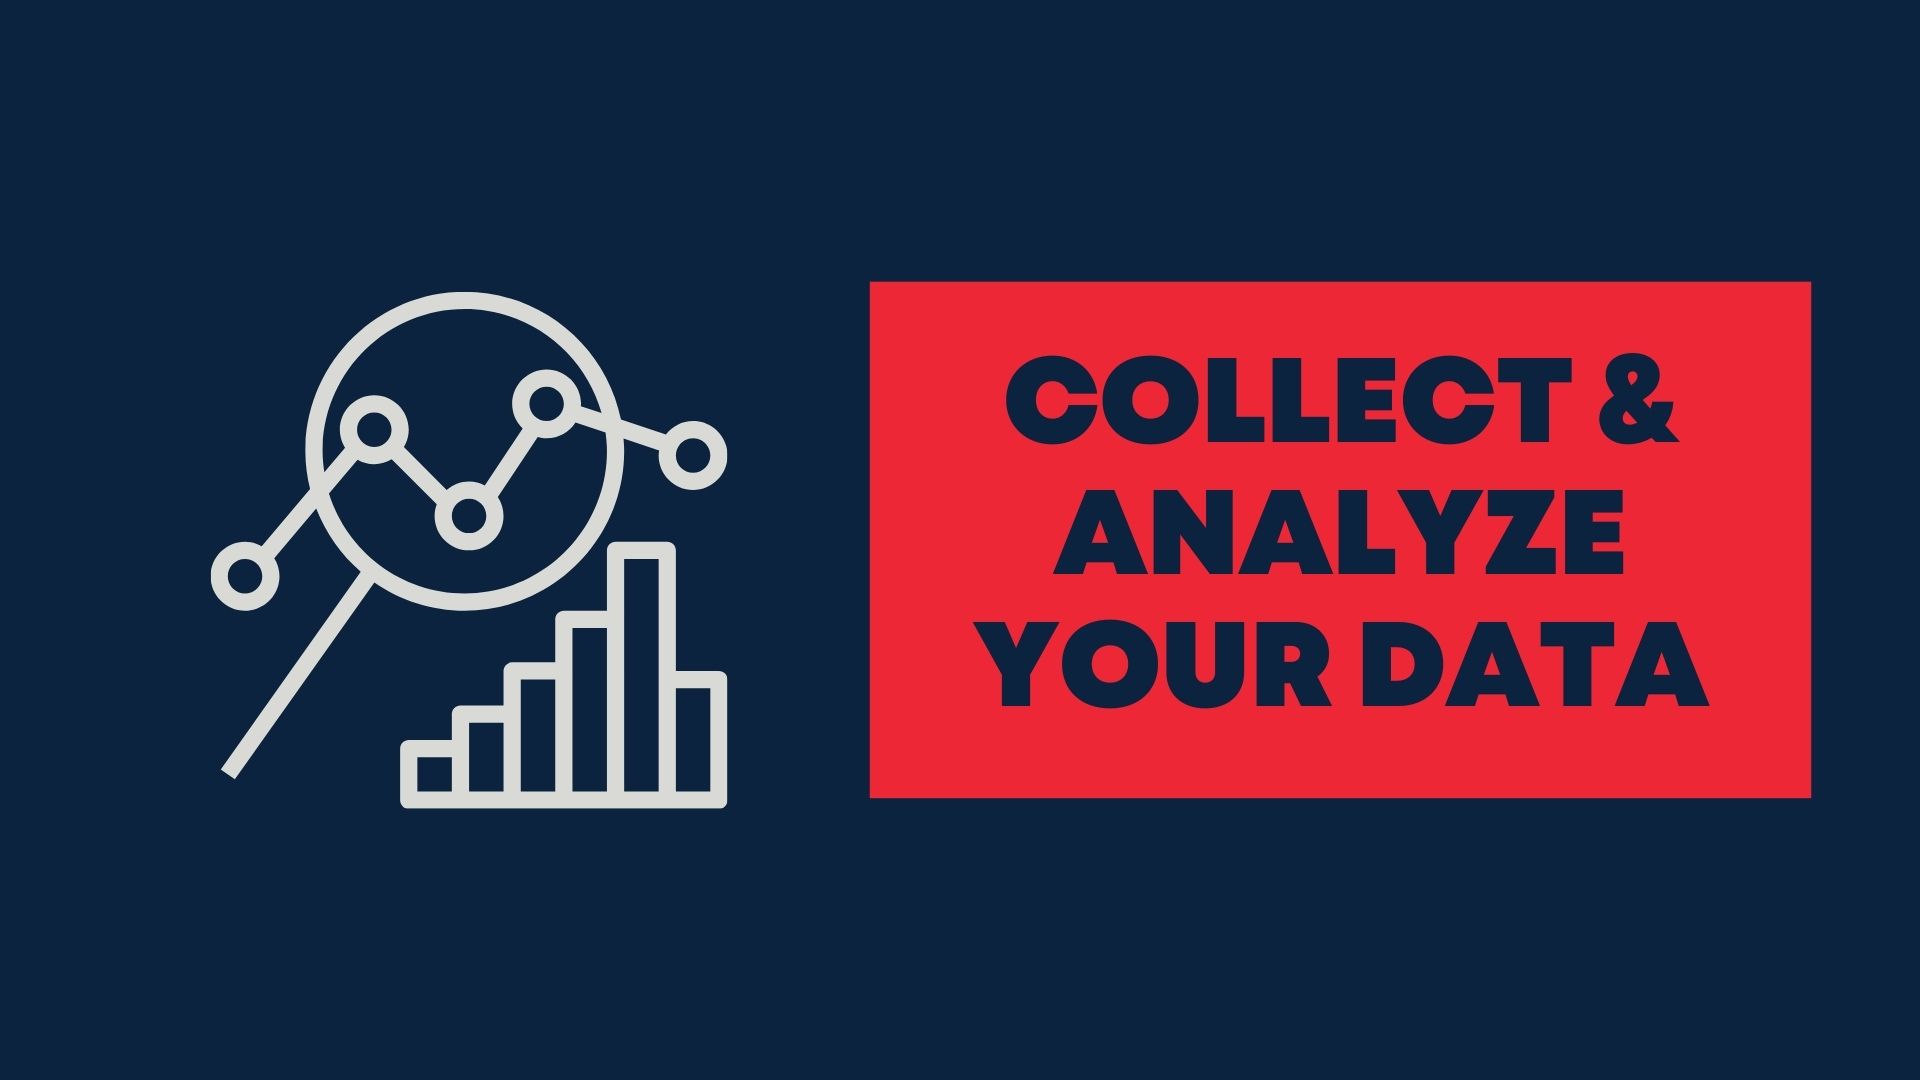 Collect & Analyze Your Data